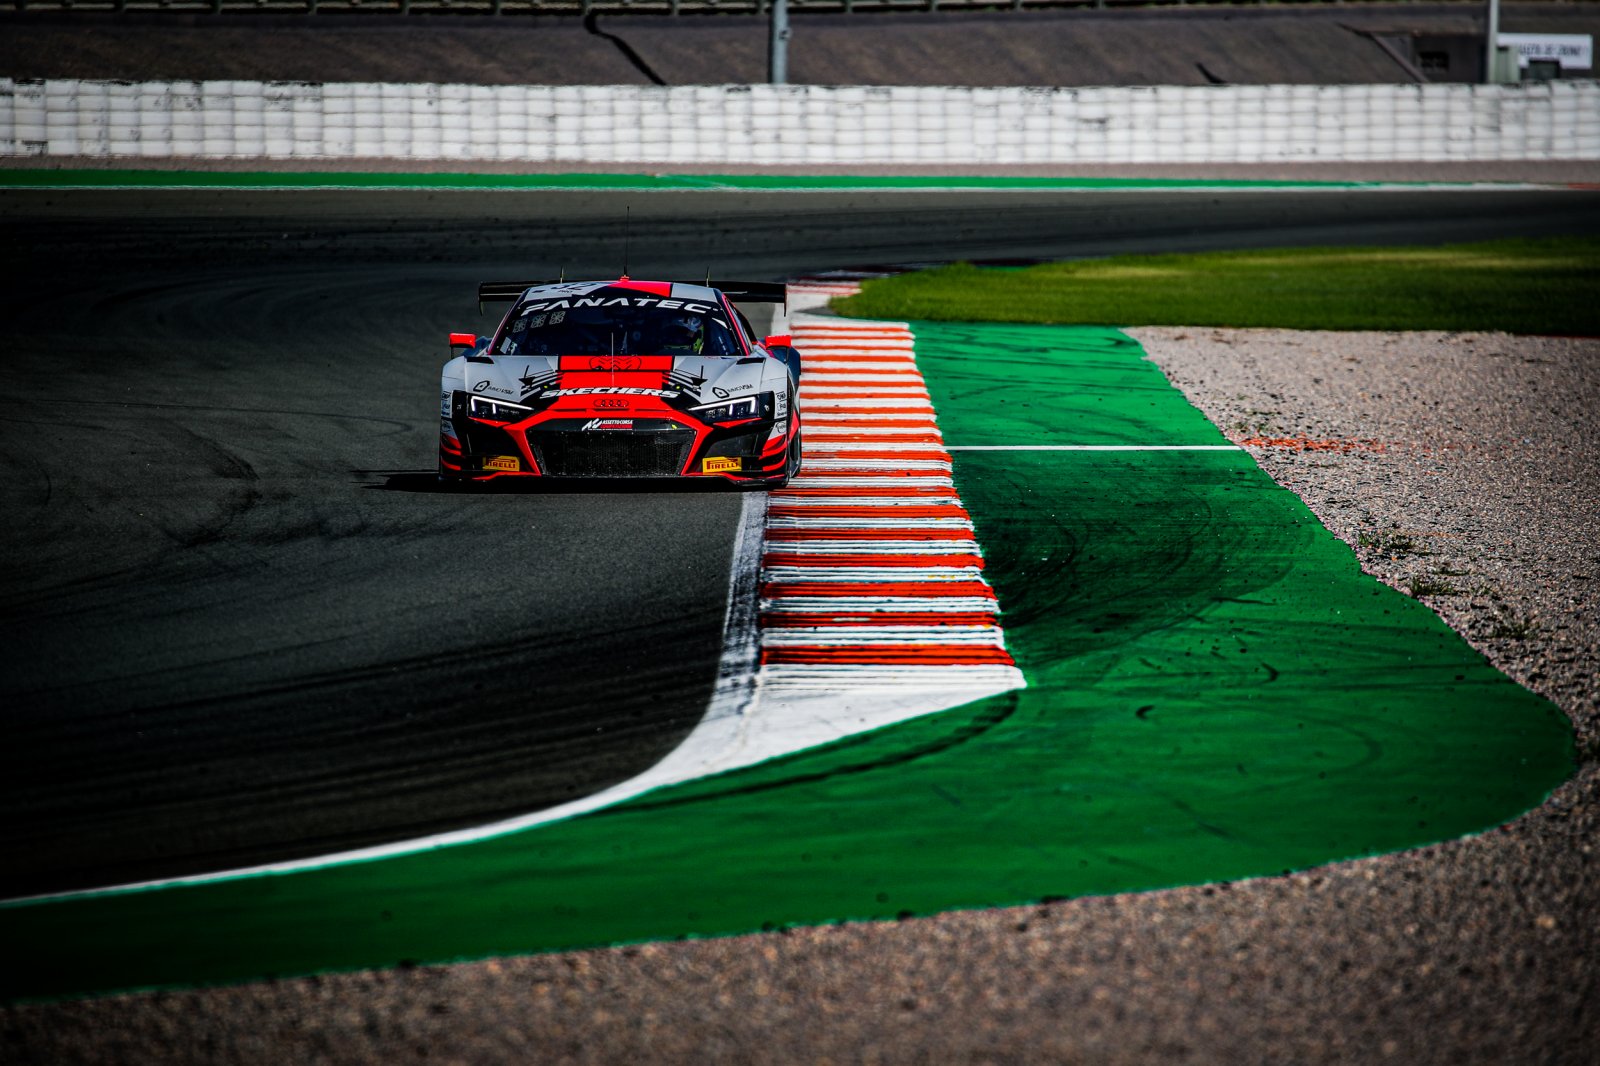 Team WRT Audi strikes back as Vanthoor paces pre-qualifying at Valencia